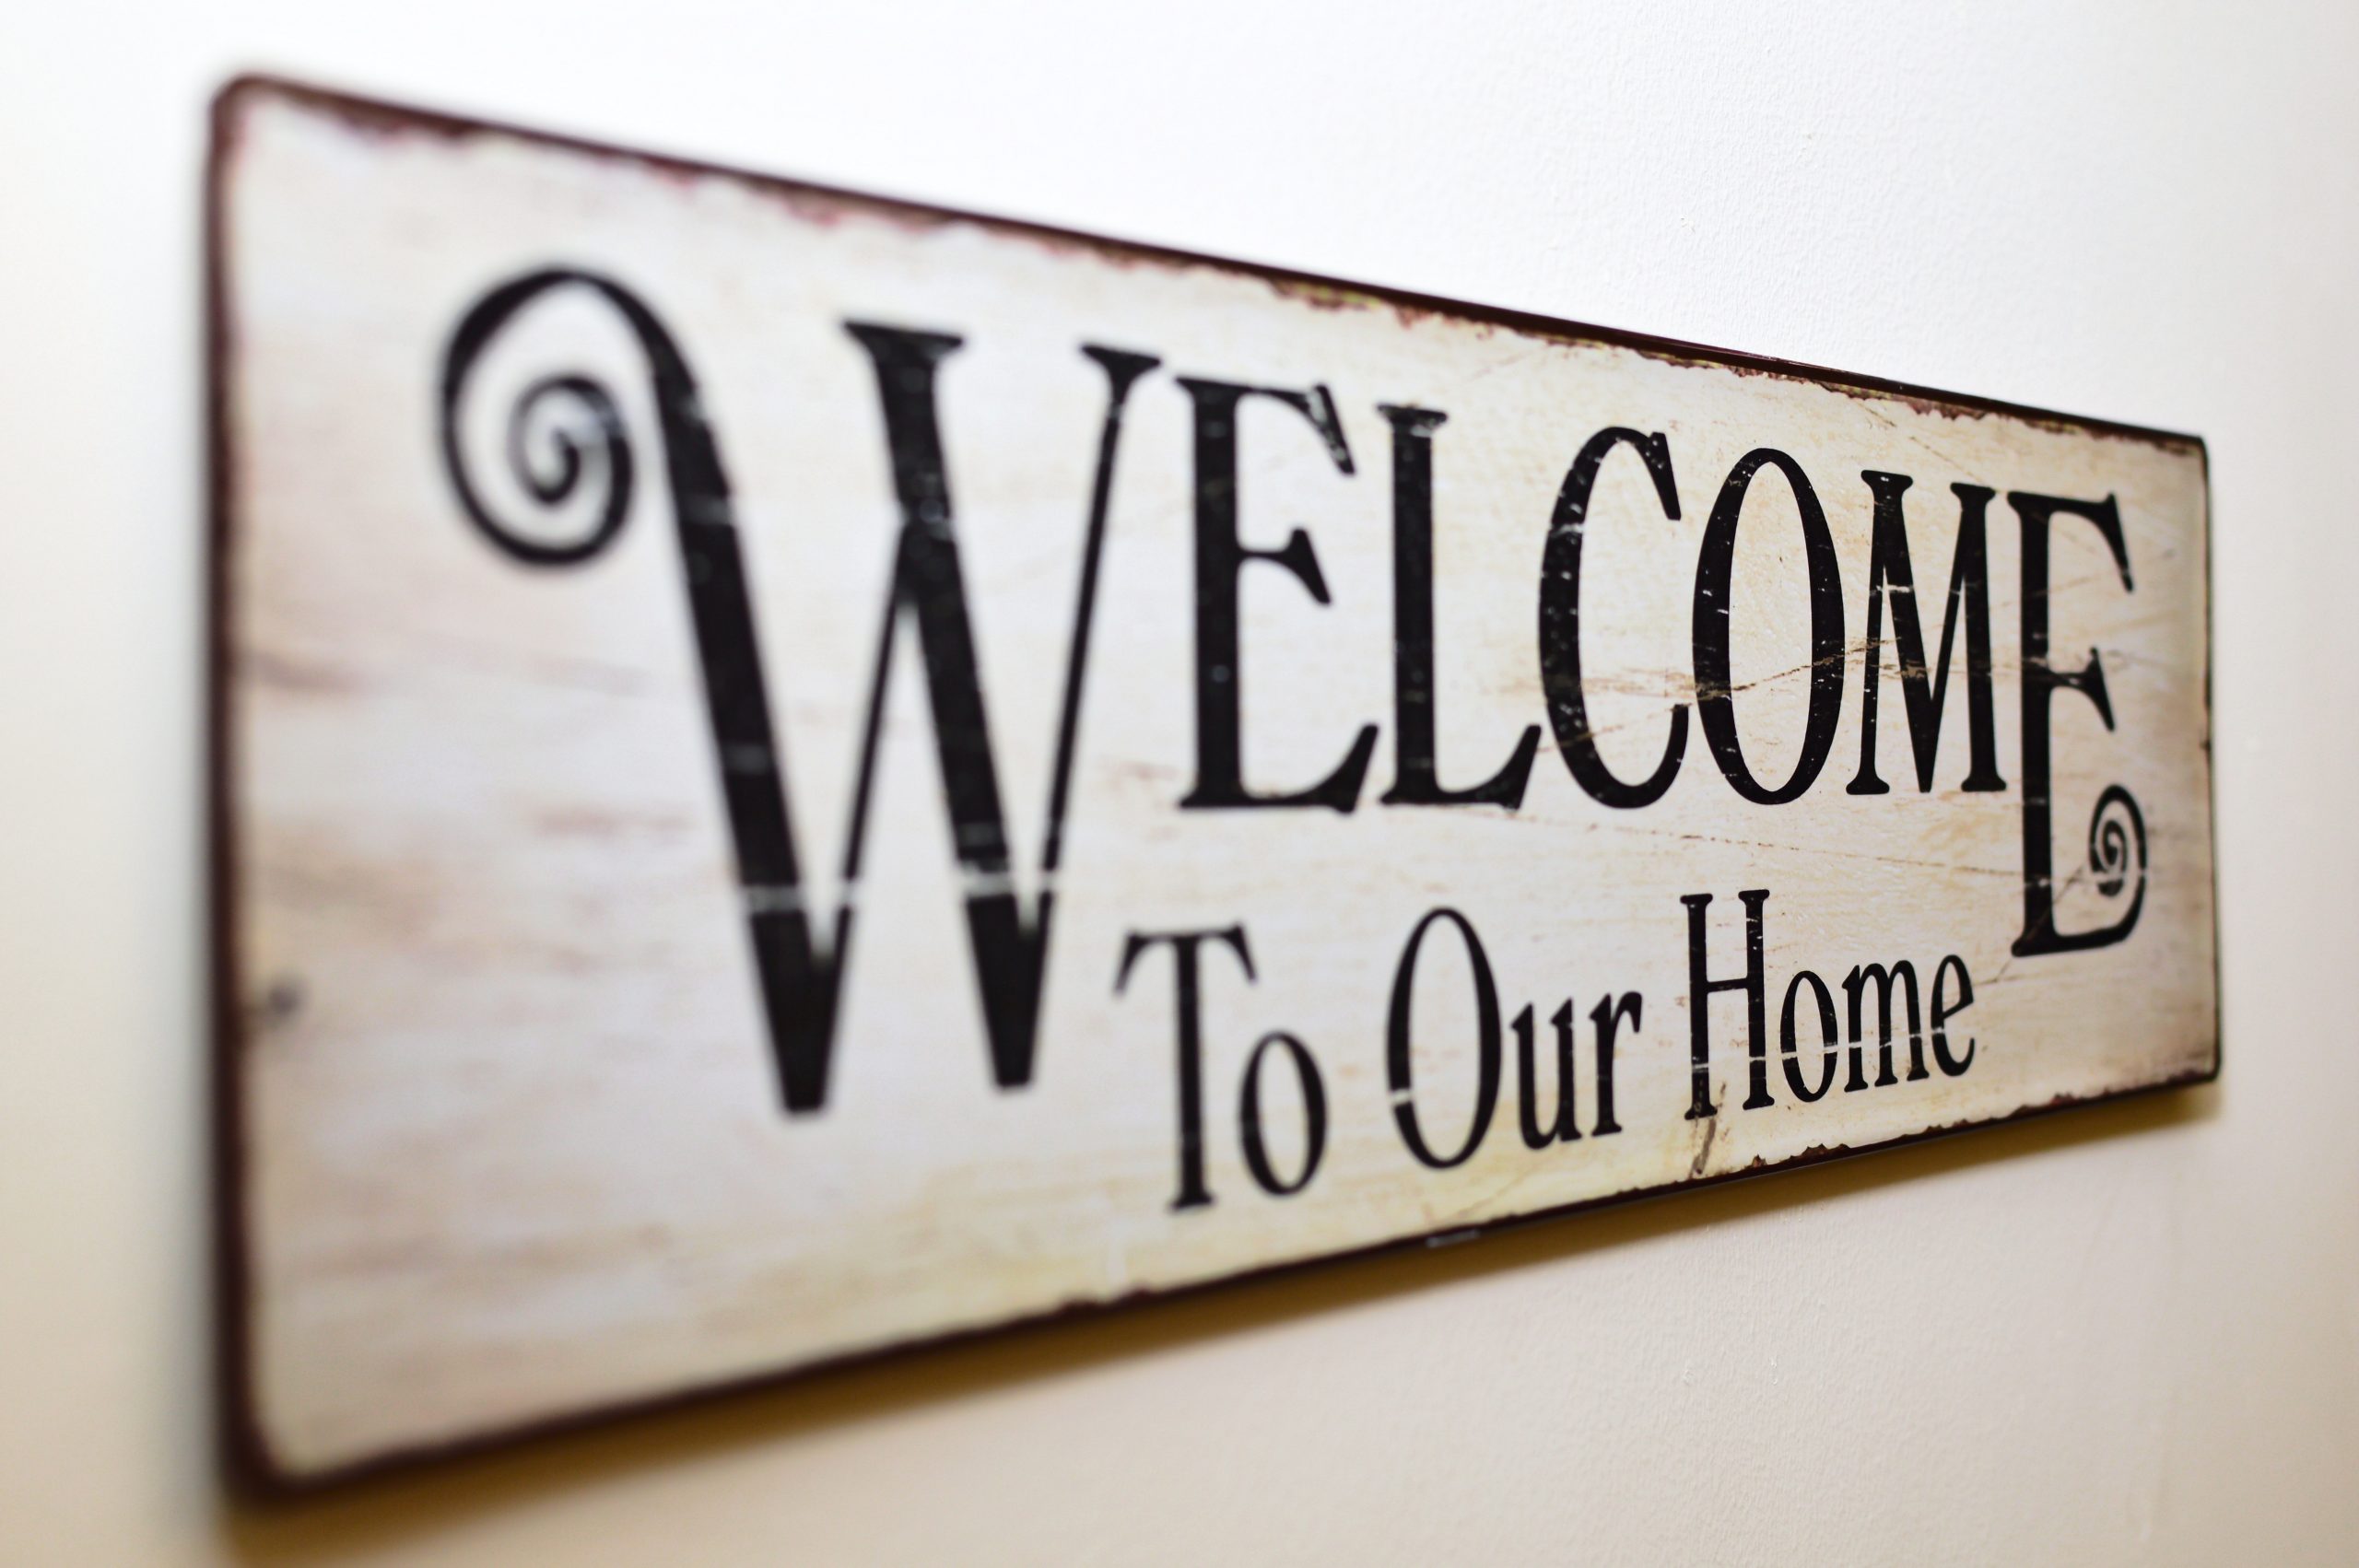 welcome-to-our-home-print-brown-wooden-wall-decor-163046